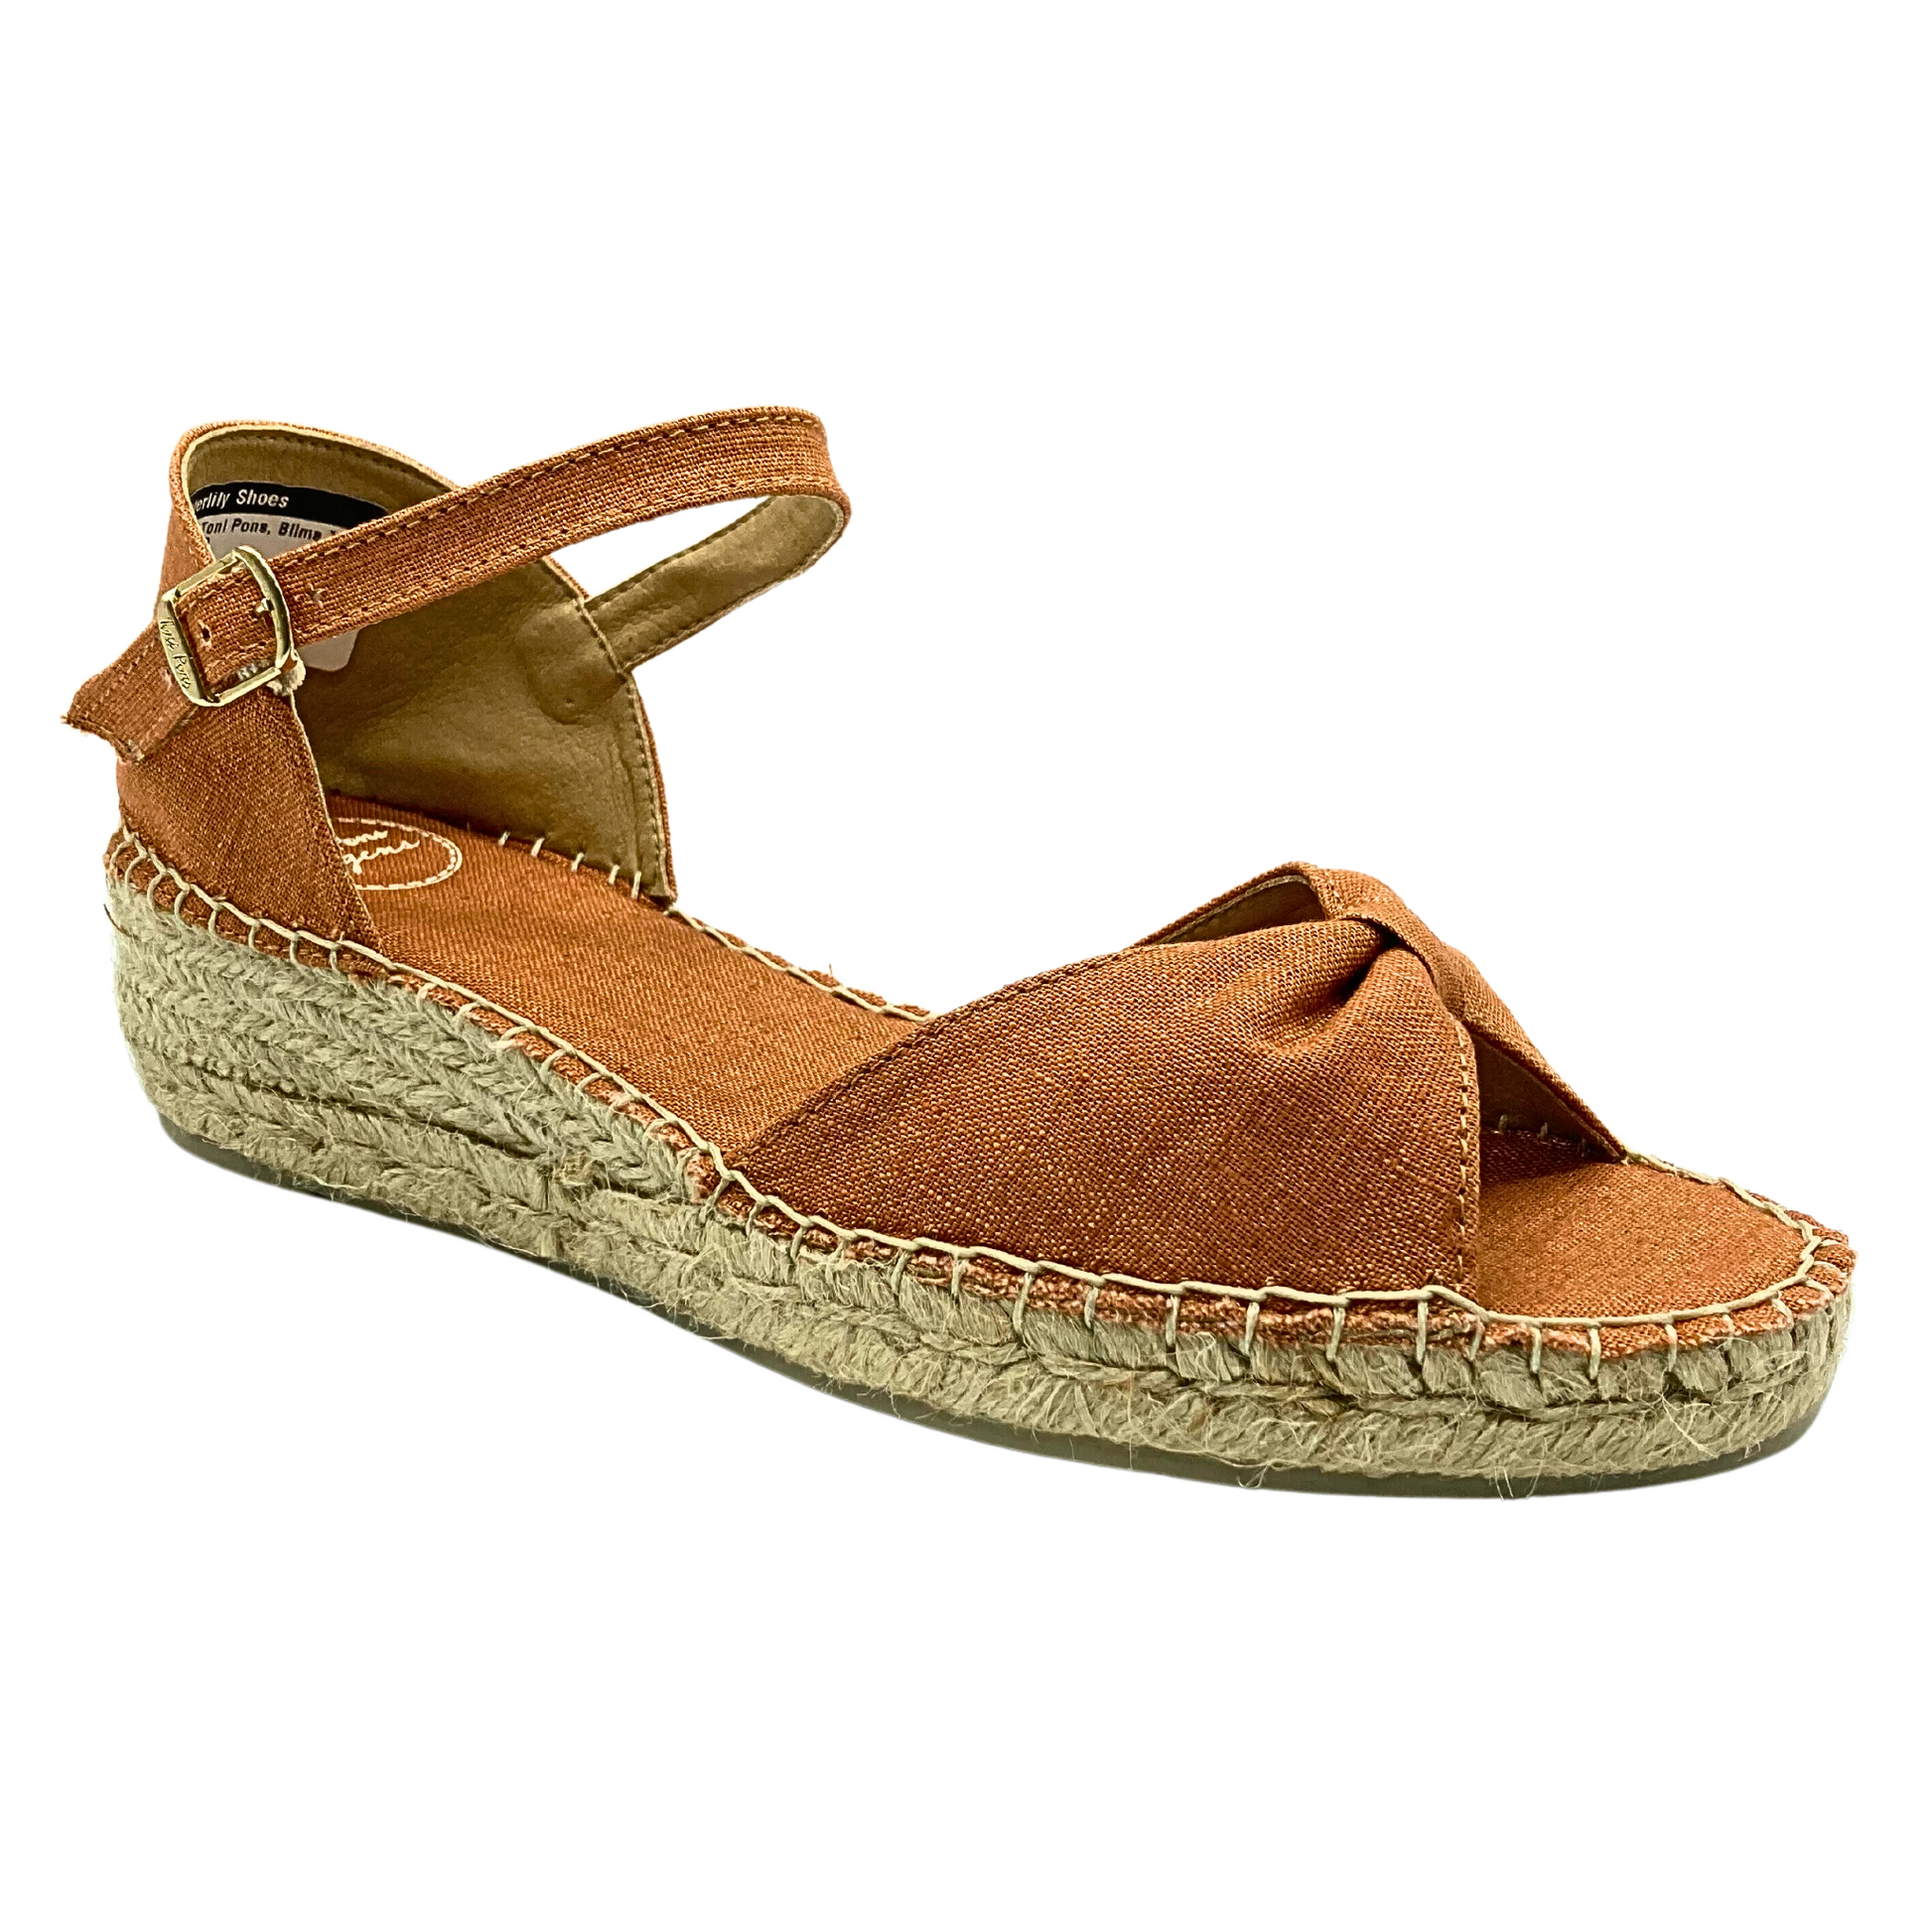 Angled side view of a simple espadrille sandale.  Puckered bow in front with open toe.  Heel is closed but there is an adjustable ankle strap.  Low wedge heel